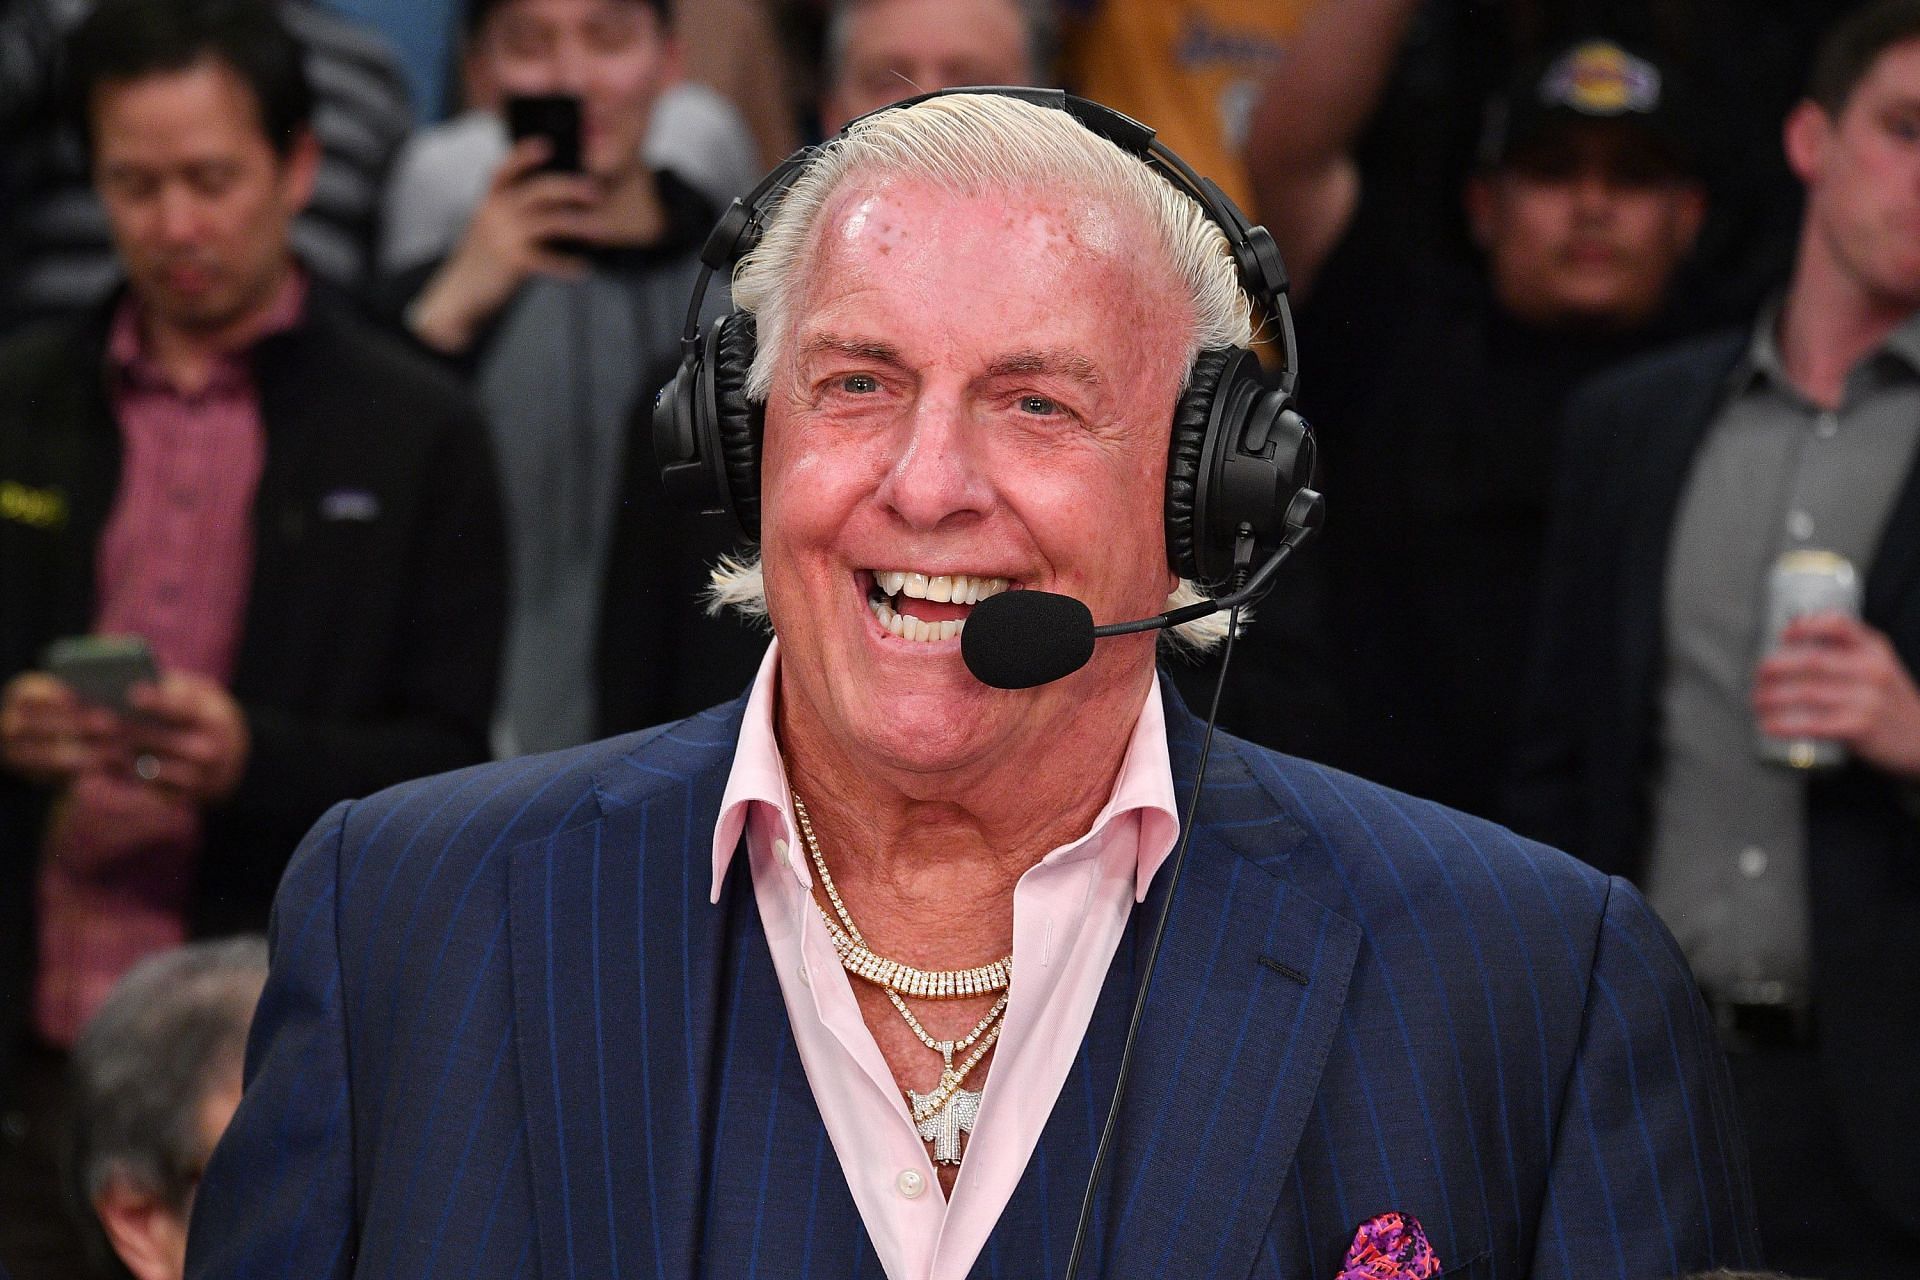 Ric Flair is coming home!